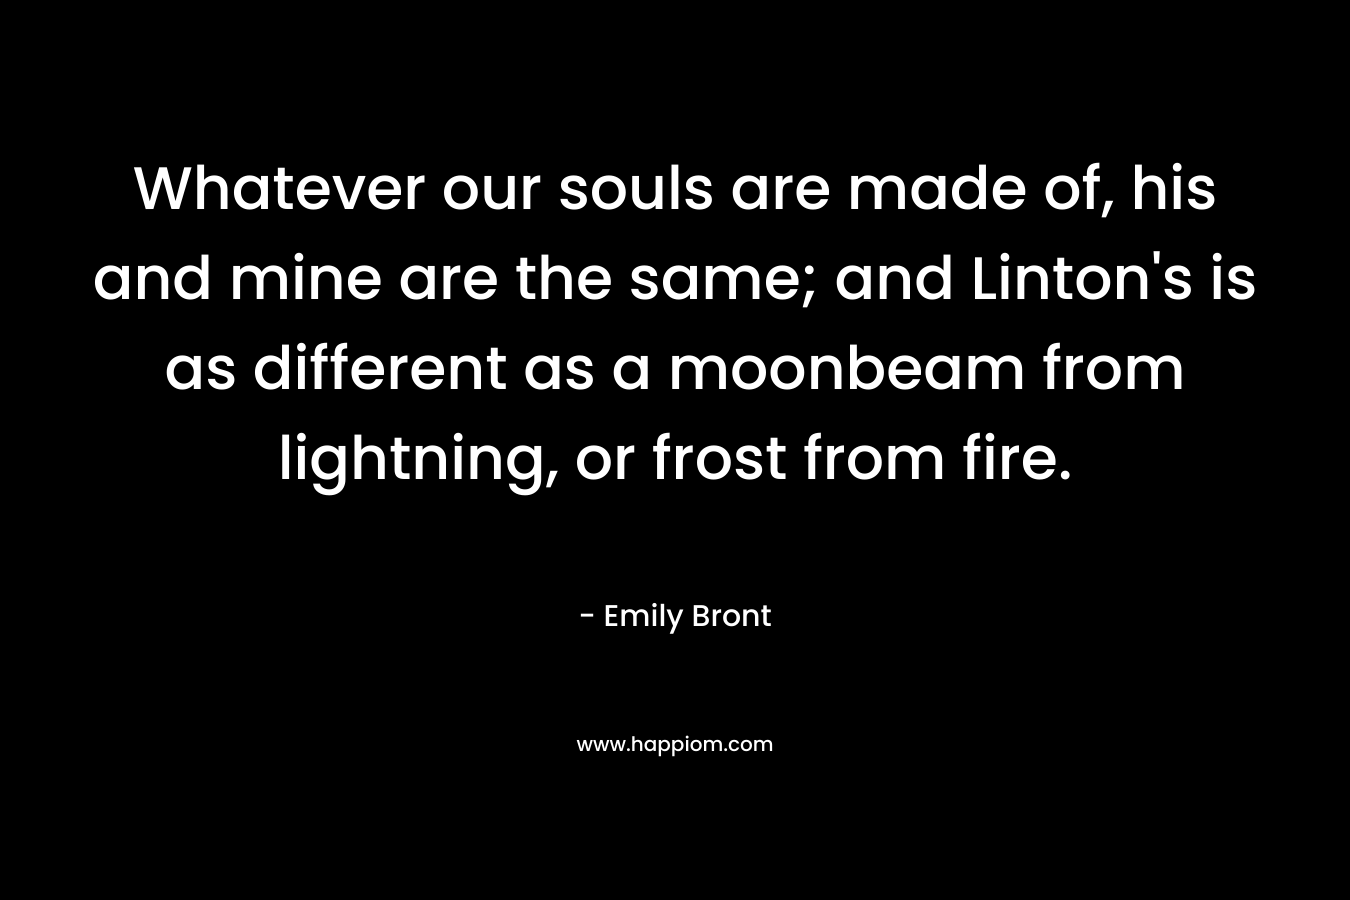 Whatever our souls are made of, his and mine are the same; and Linton’s is as different as a moonbeam from lightning, or frost from fire. – Emily Bront